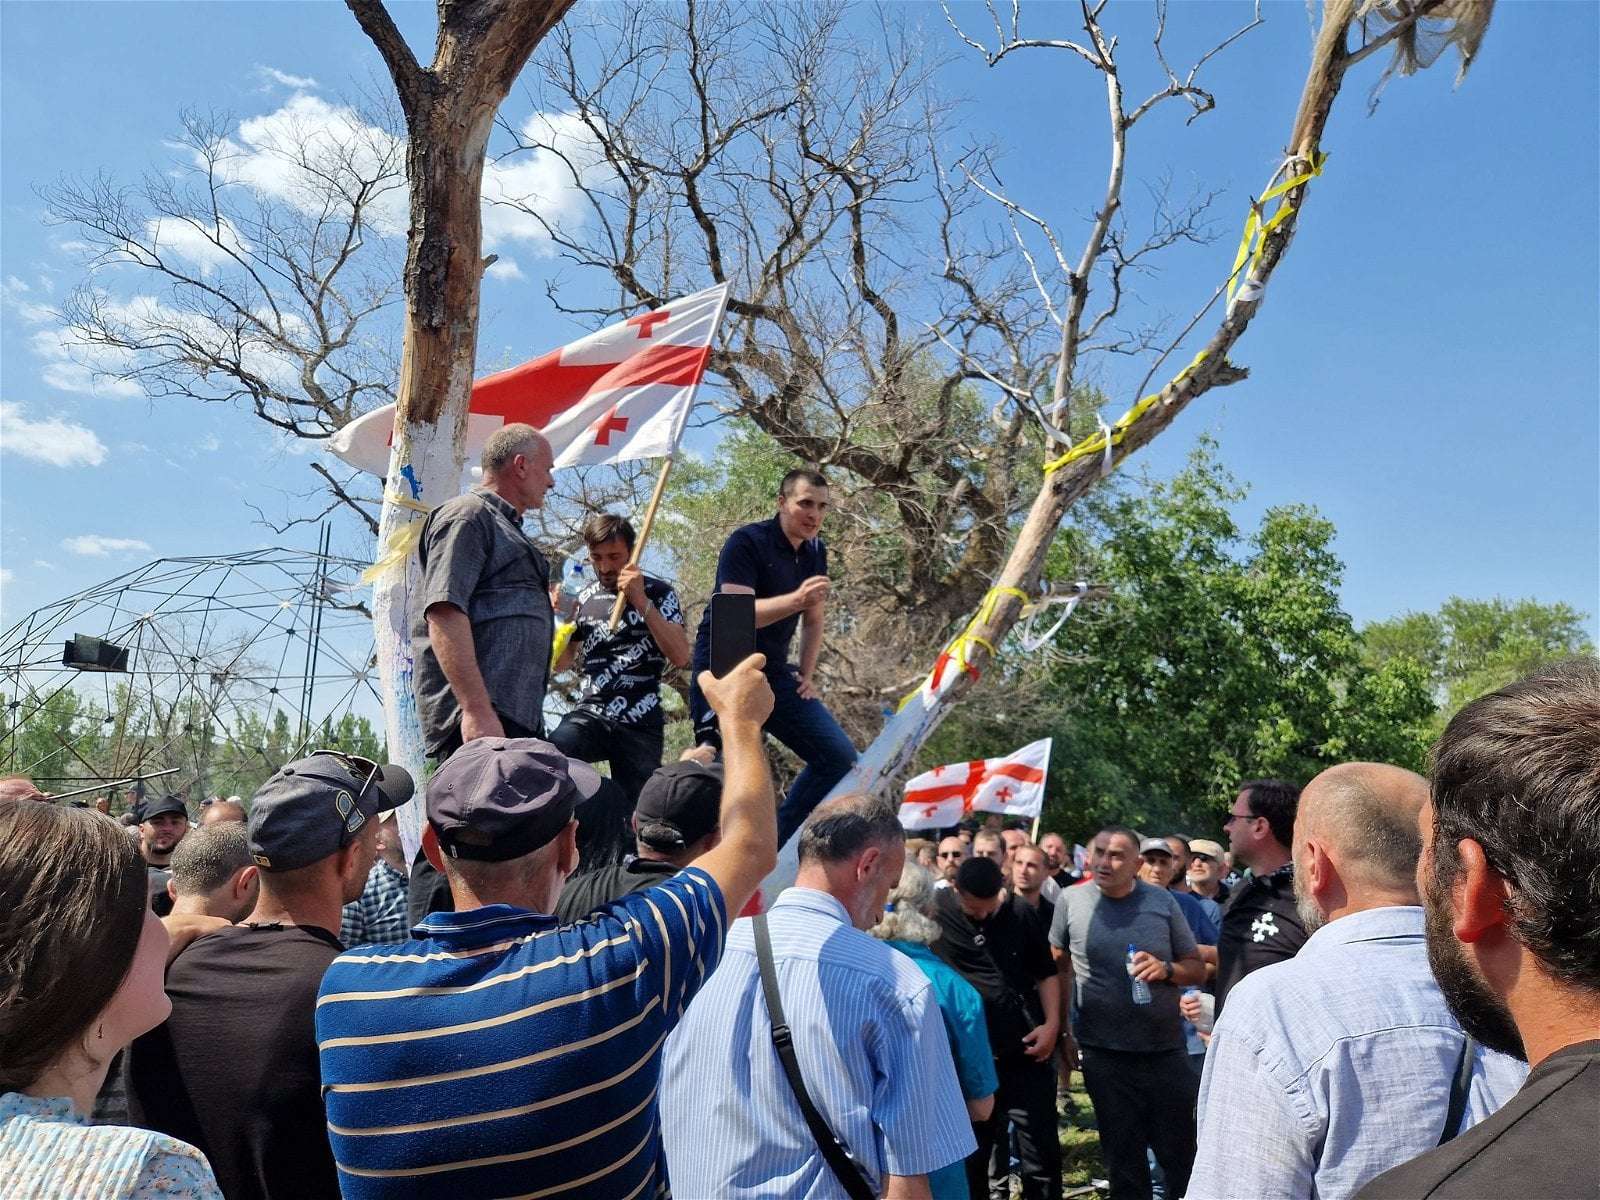 image for Police Stands by as Far-Right Groups Attack Tbilisi Pride Festival